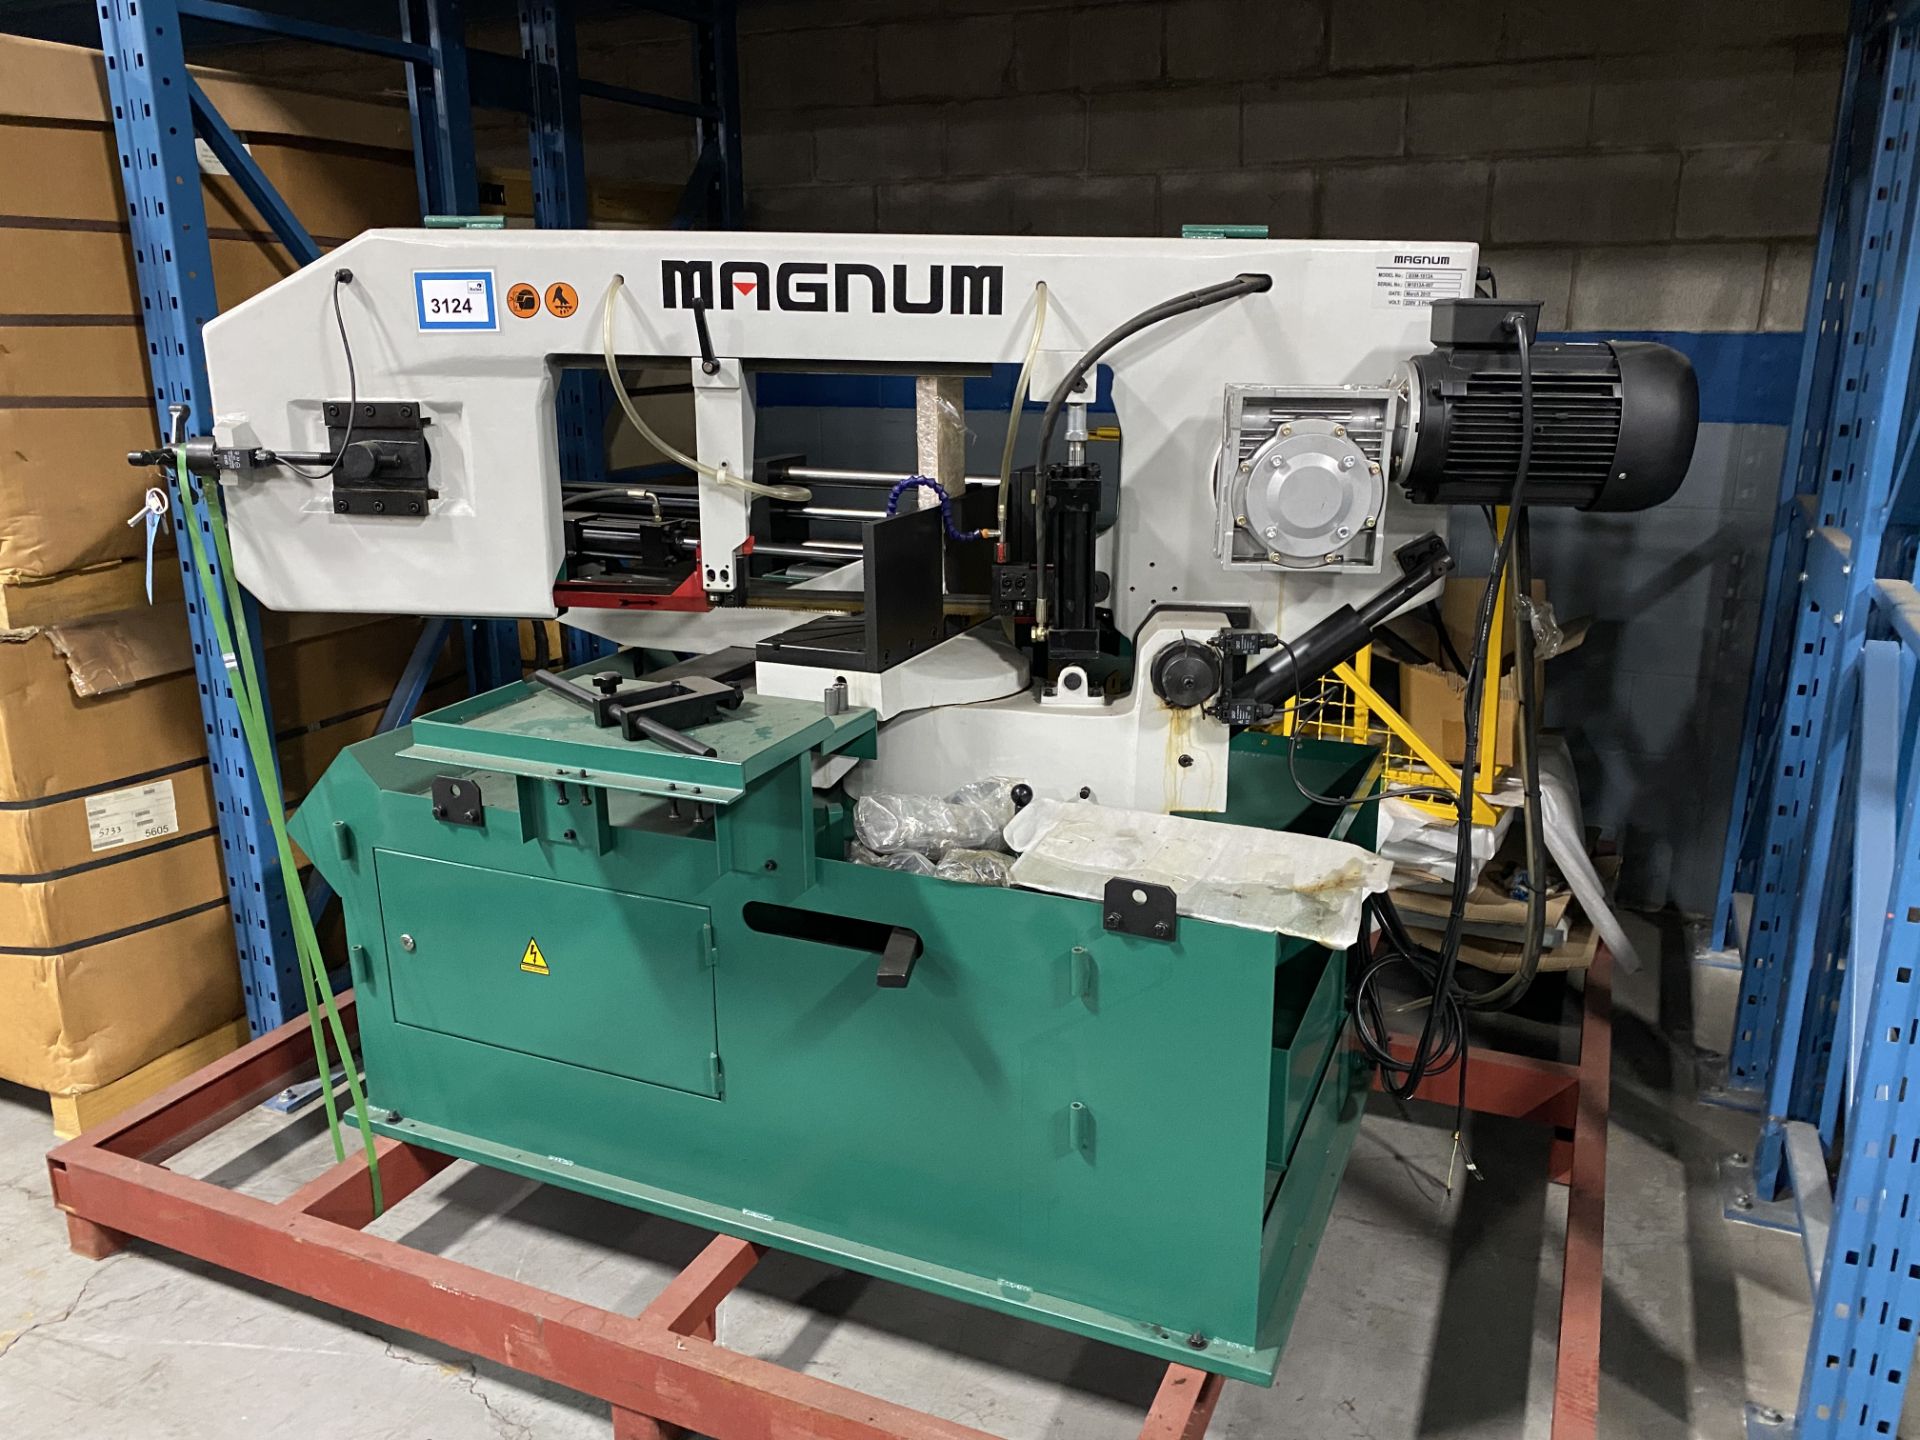 Magnun Model BSM-1813A Horizontal Bandsaw, 24"x15" Capacity, Brand New Never Used, New 2015